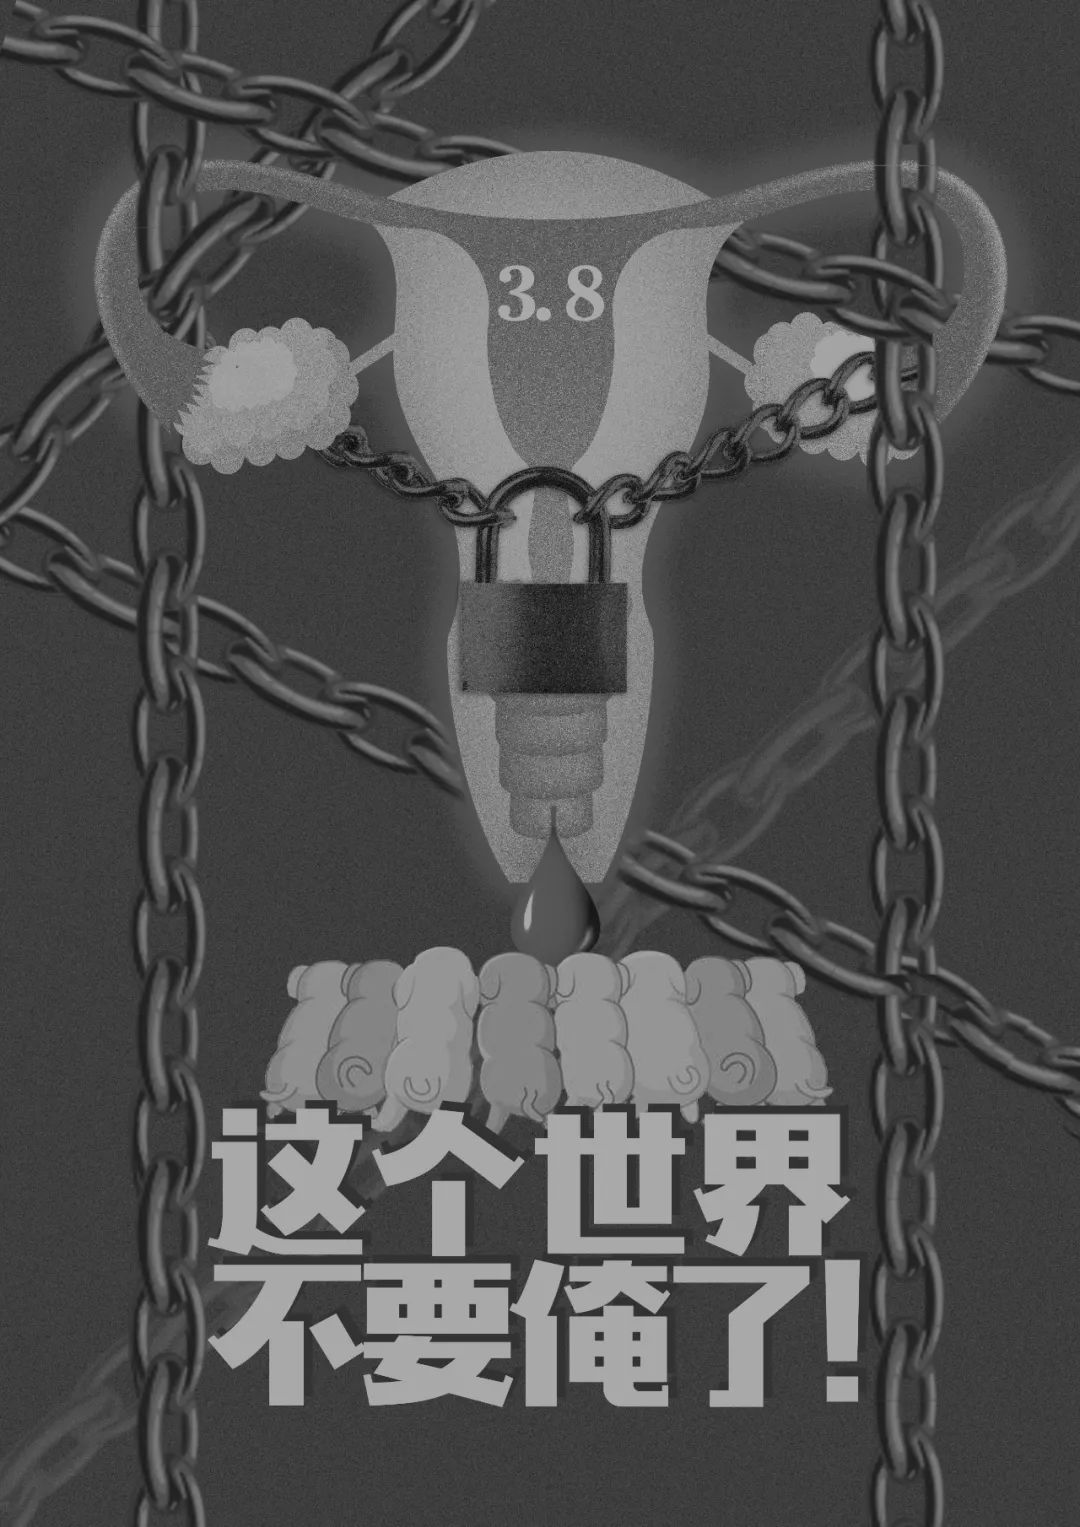 Gray illustration shows eight piglets suckling below a chained uterus. Text reads: “March 8” [International Women’s Day] and “This world doesn’t want me!” [words uttered by Xiaohuamei in a video]